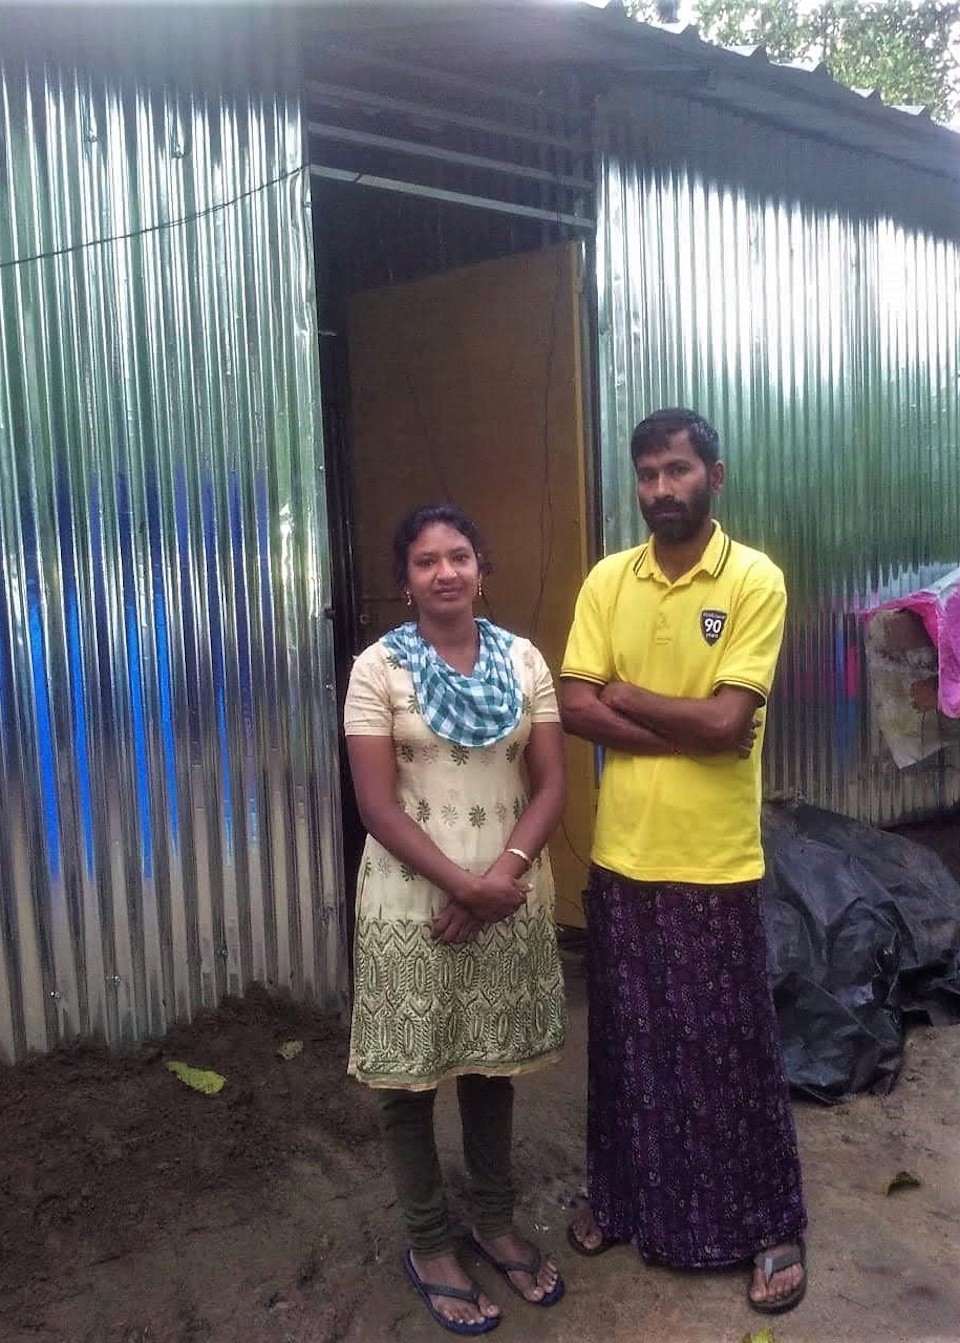 The house of Smitha and her husband A Ramesh (left) was so badly damaged during the floods that they had to put up plastic sheets for walls in the aftermath. With the help of SaveAGram, they built a new home with tin walls. Photo courtesy of SaveAGram